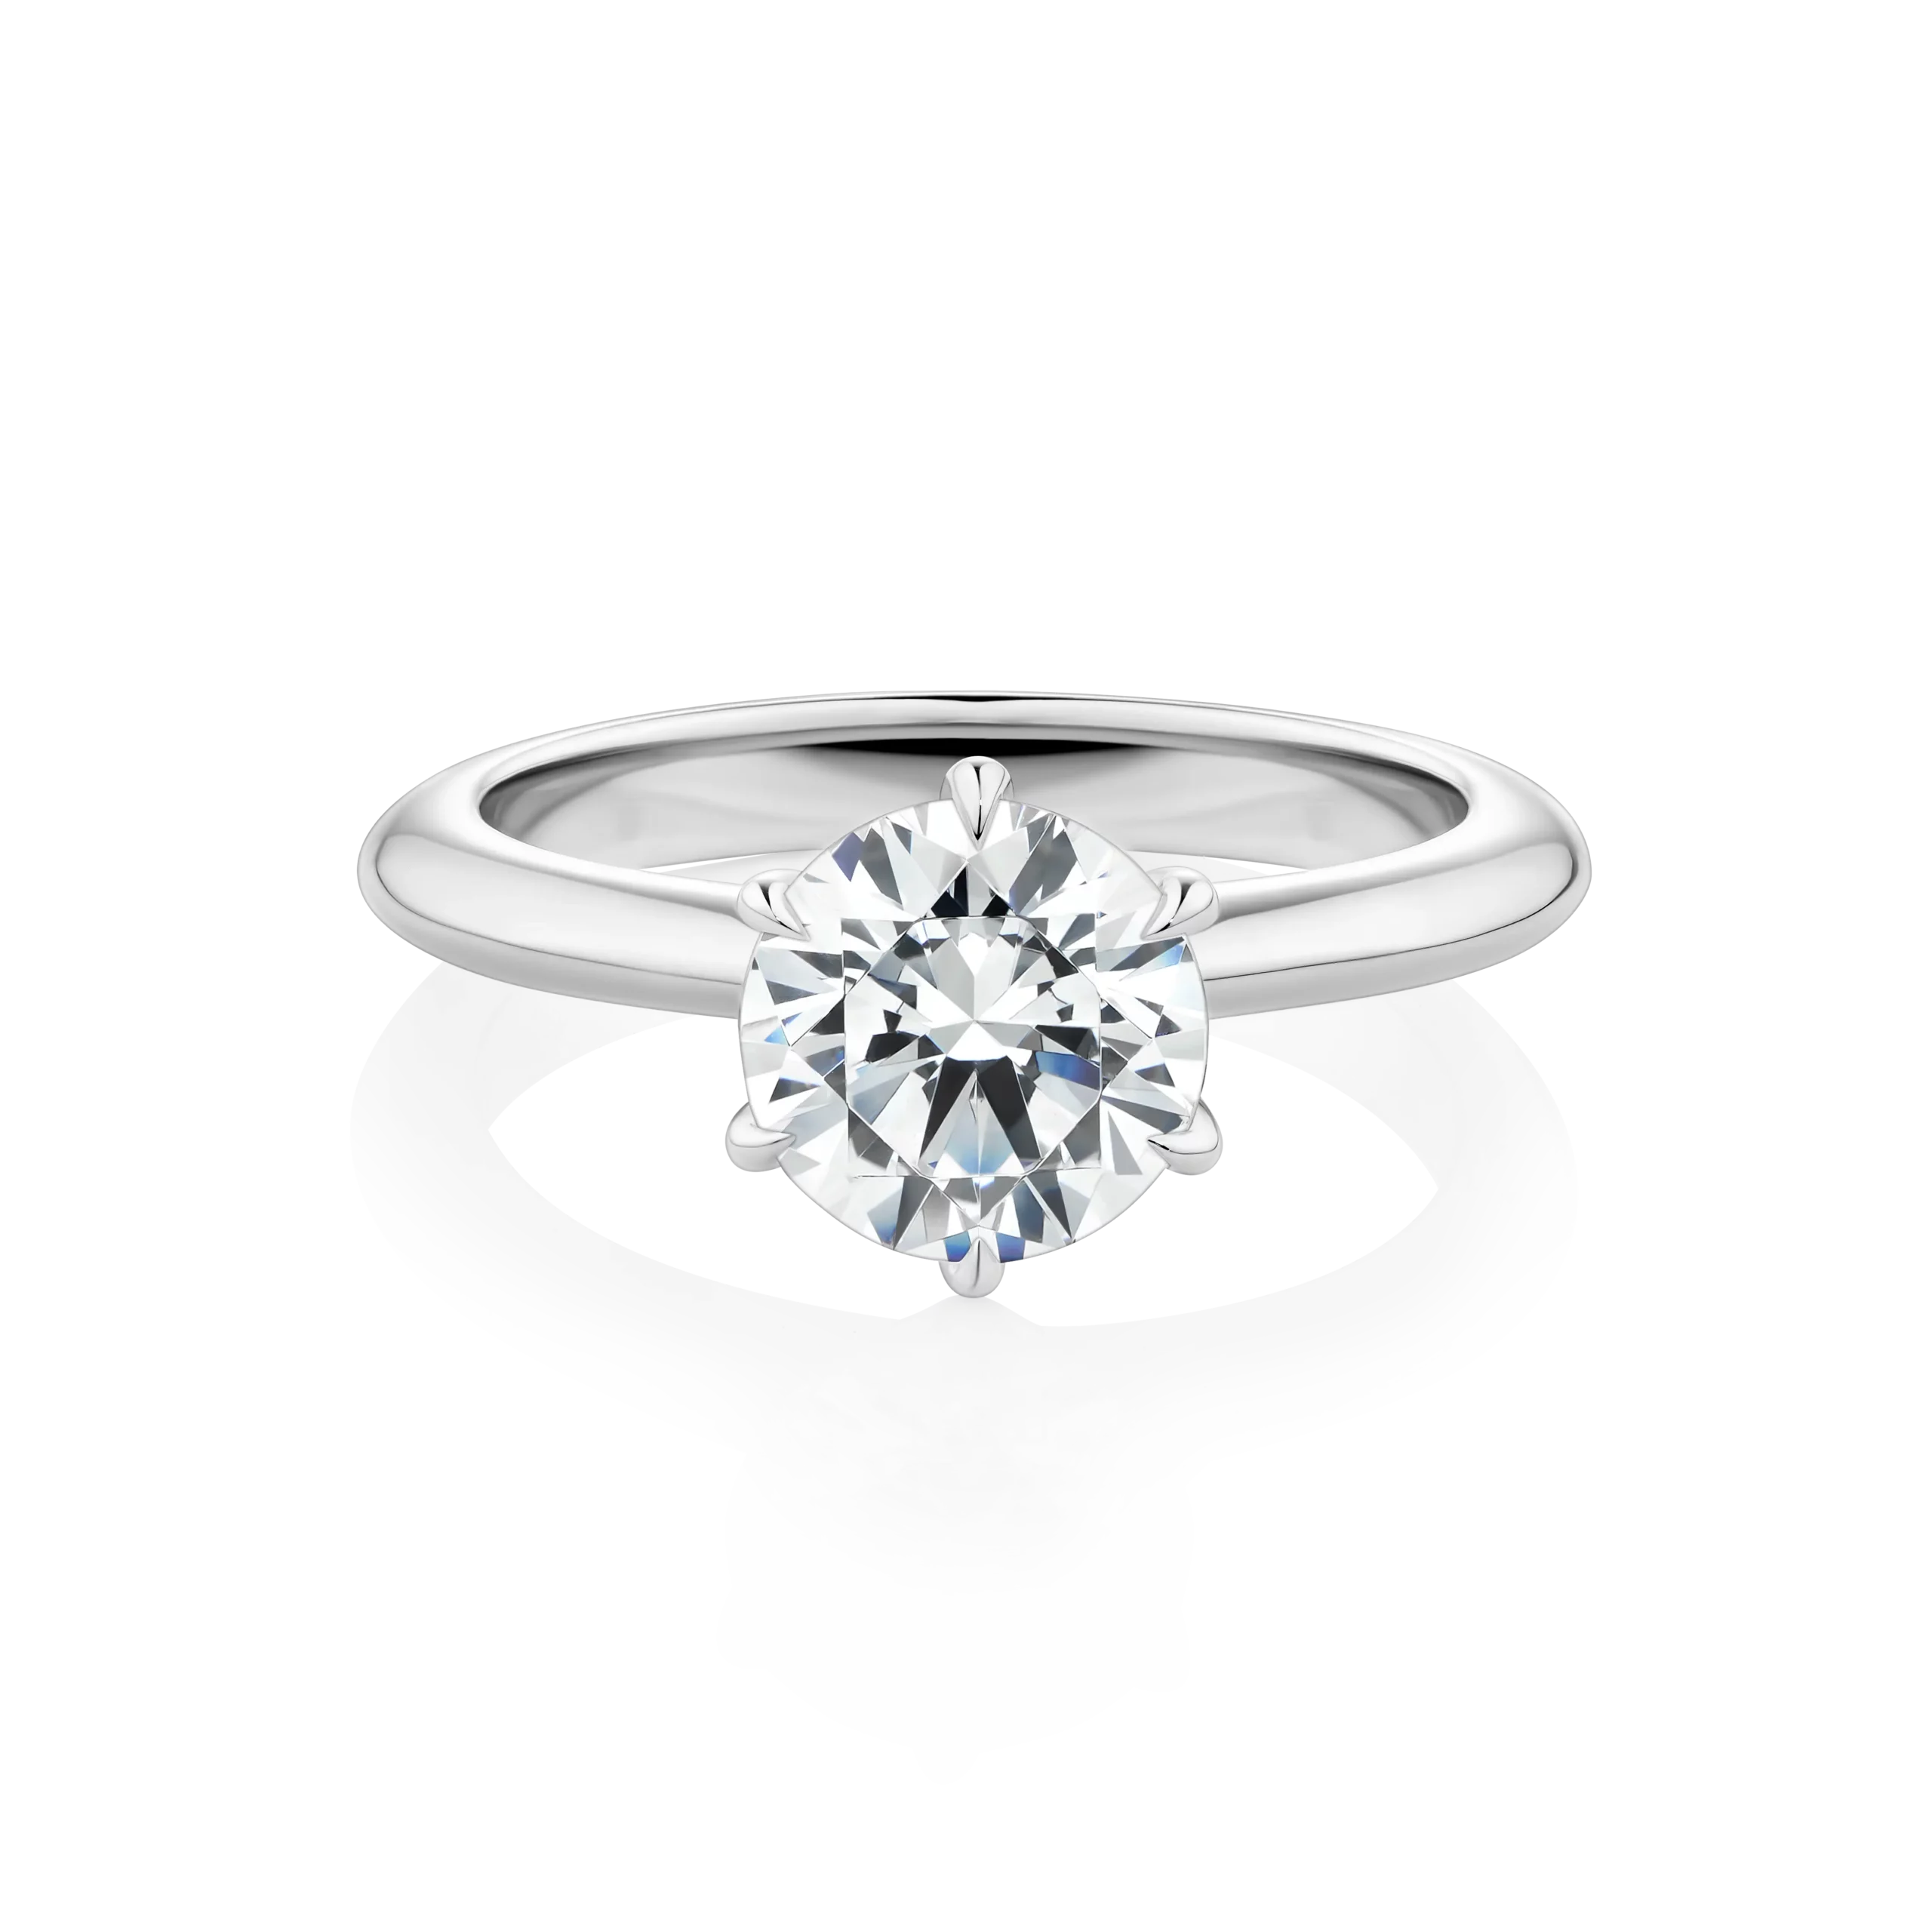 Southern-Star-Platinum-6-claw-Round-Cut-Diamond-Engagement-Ring